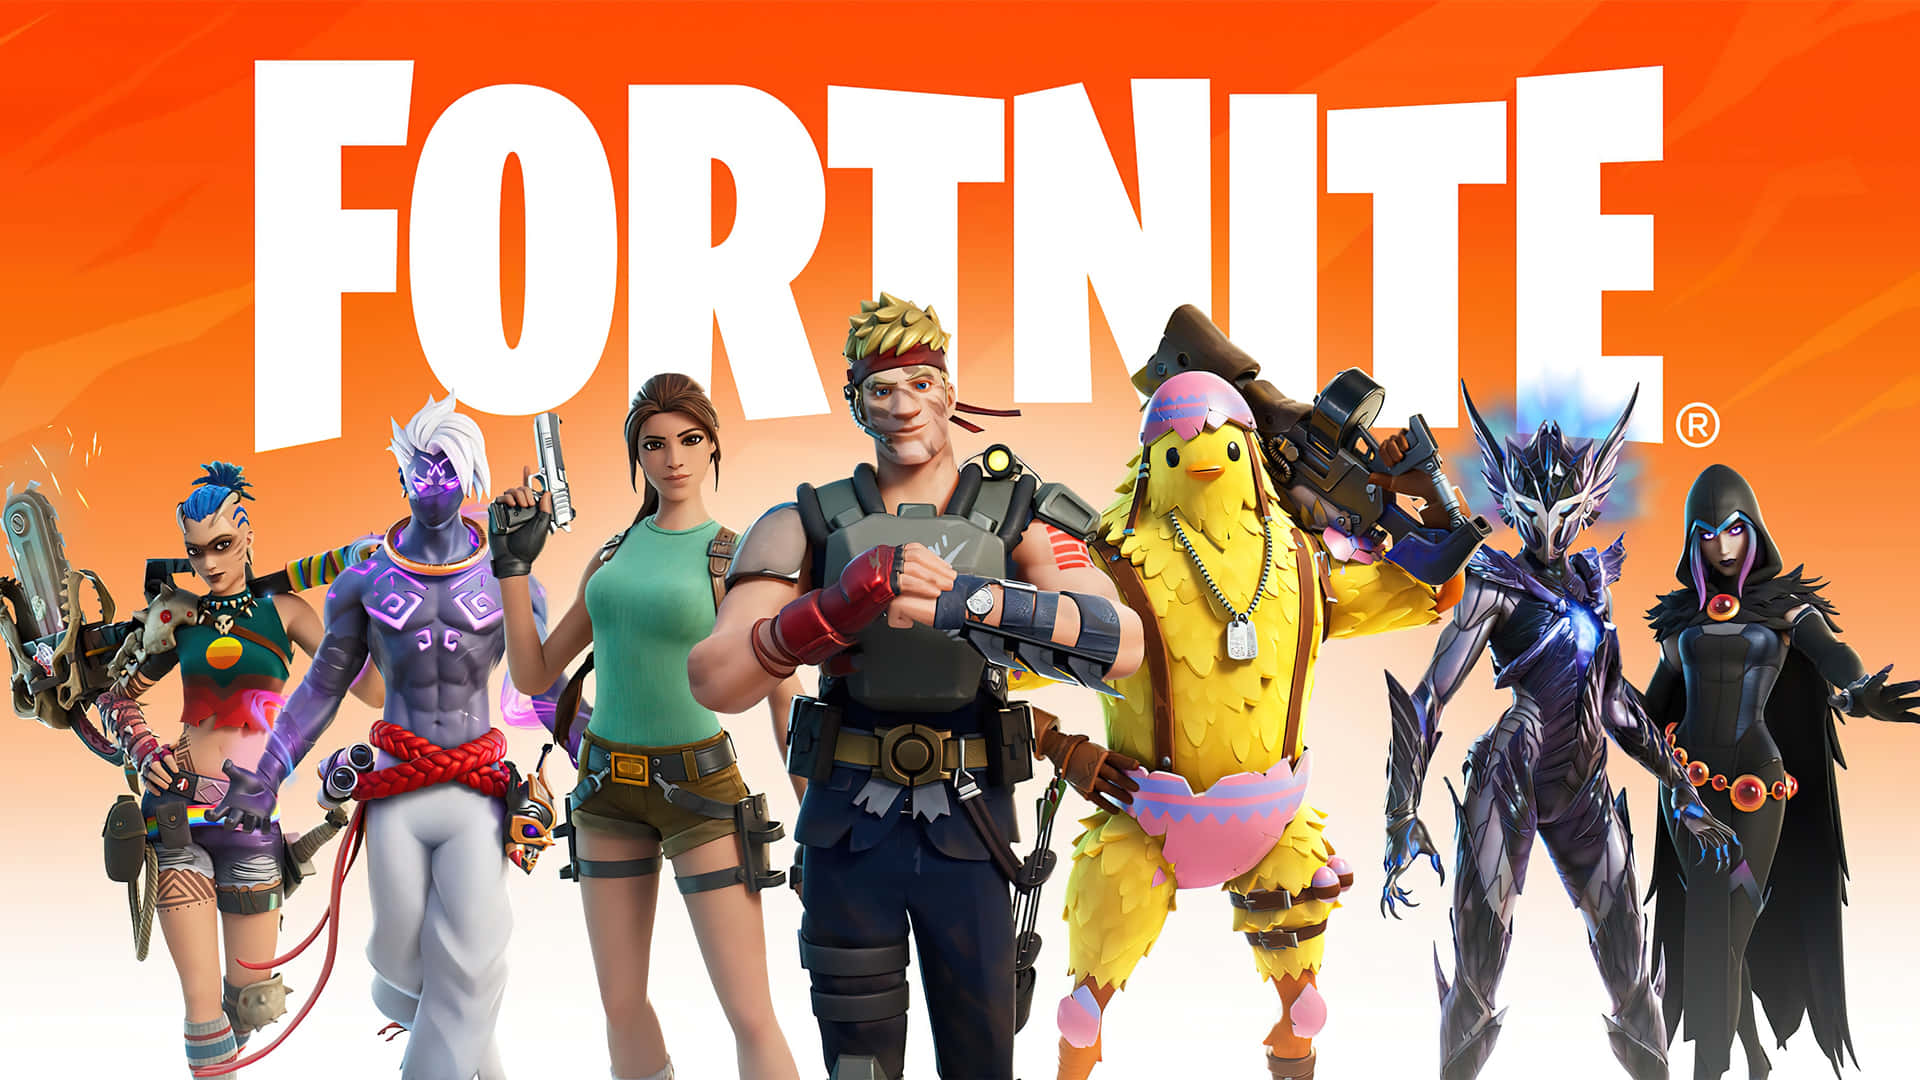 Fortnite Logo With A Group Of Characters